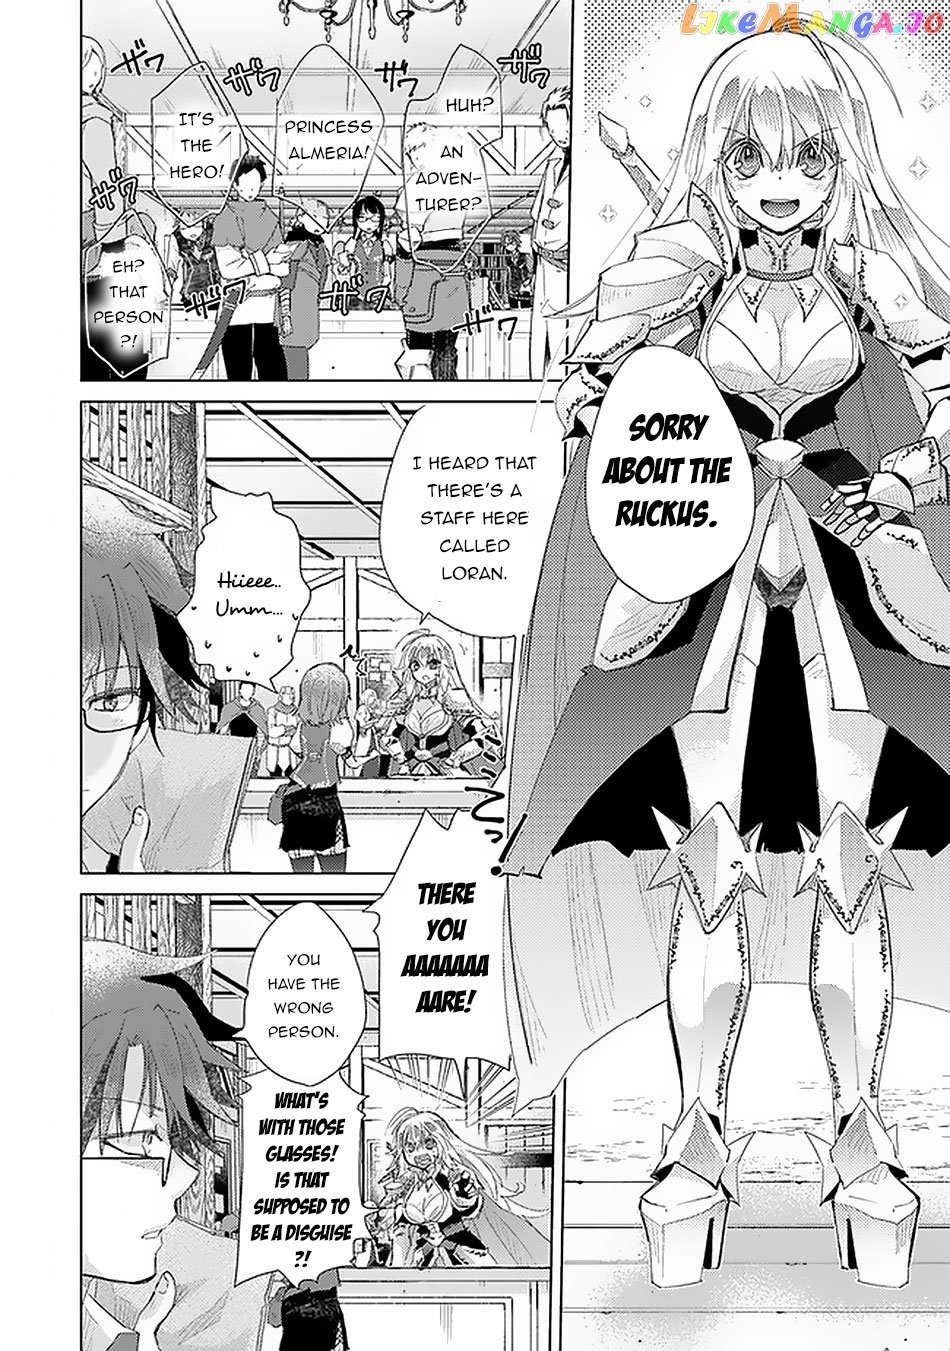 The Guild Official With The Out-of-the-Way Skill “Shadowy” Is, In Fact, The Legendary Assassin chapter 12 - page 7